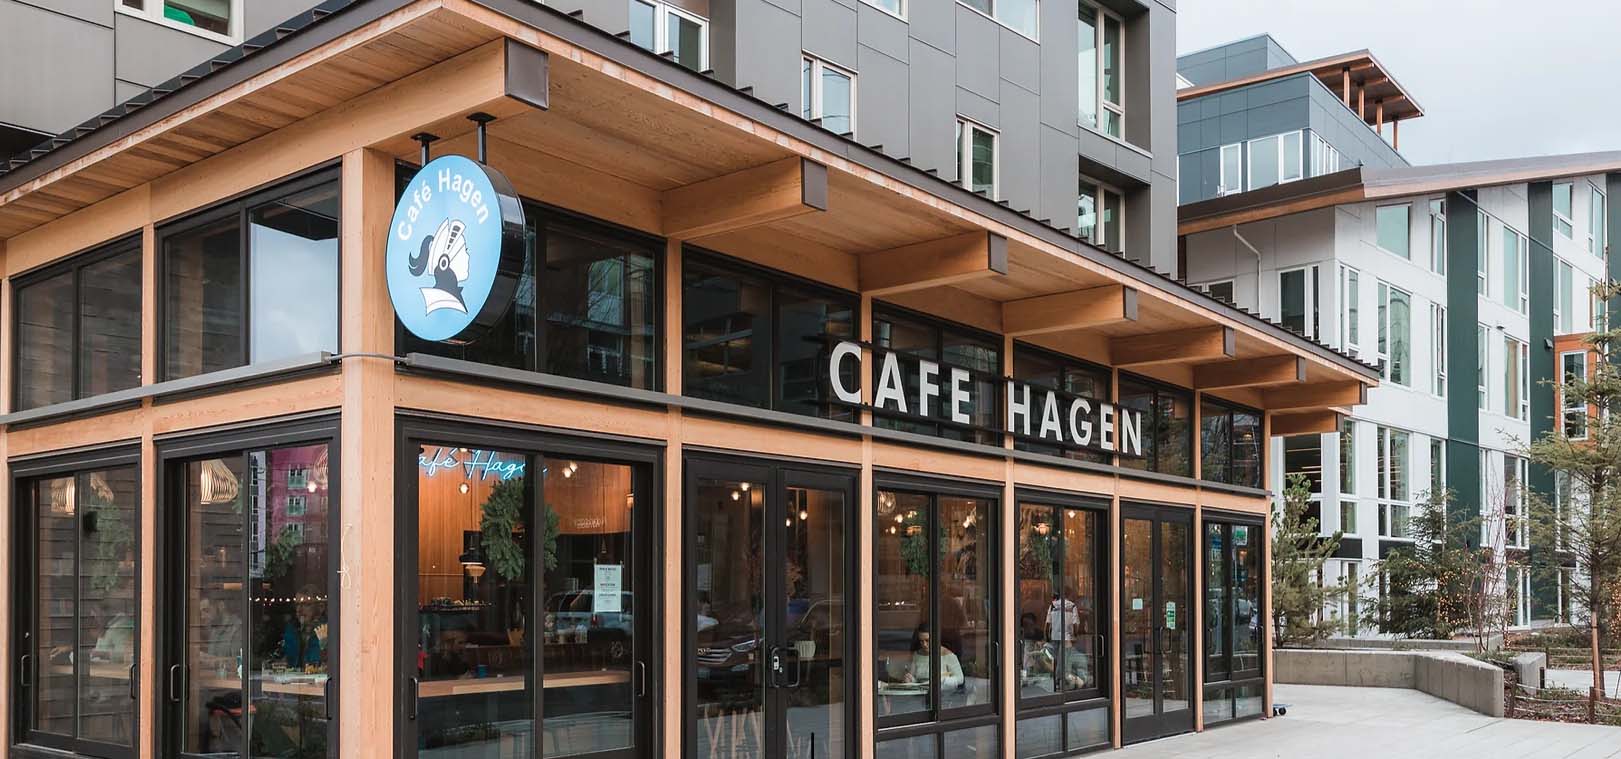 View of Cafe Hagen from the street.